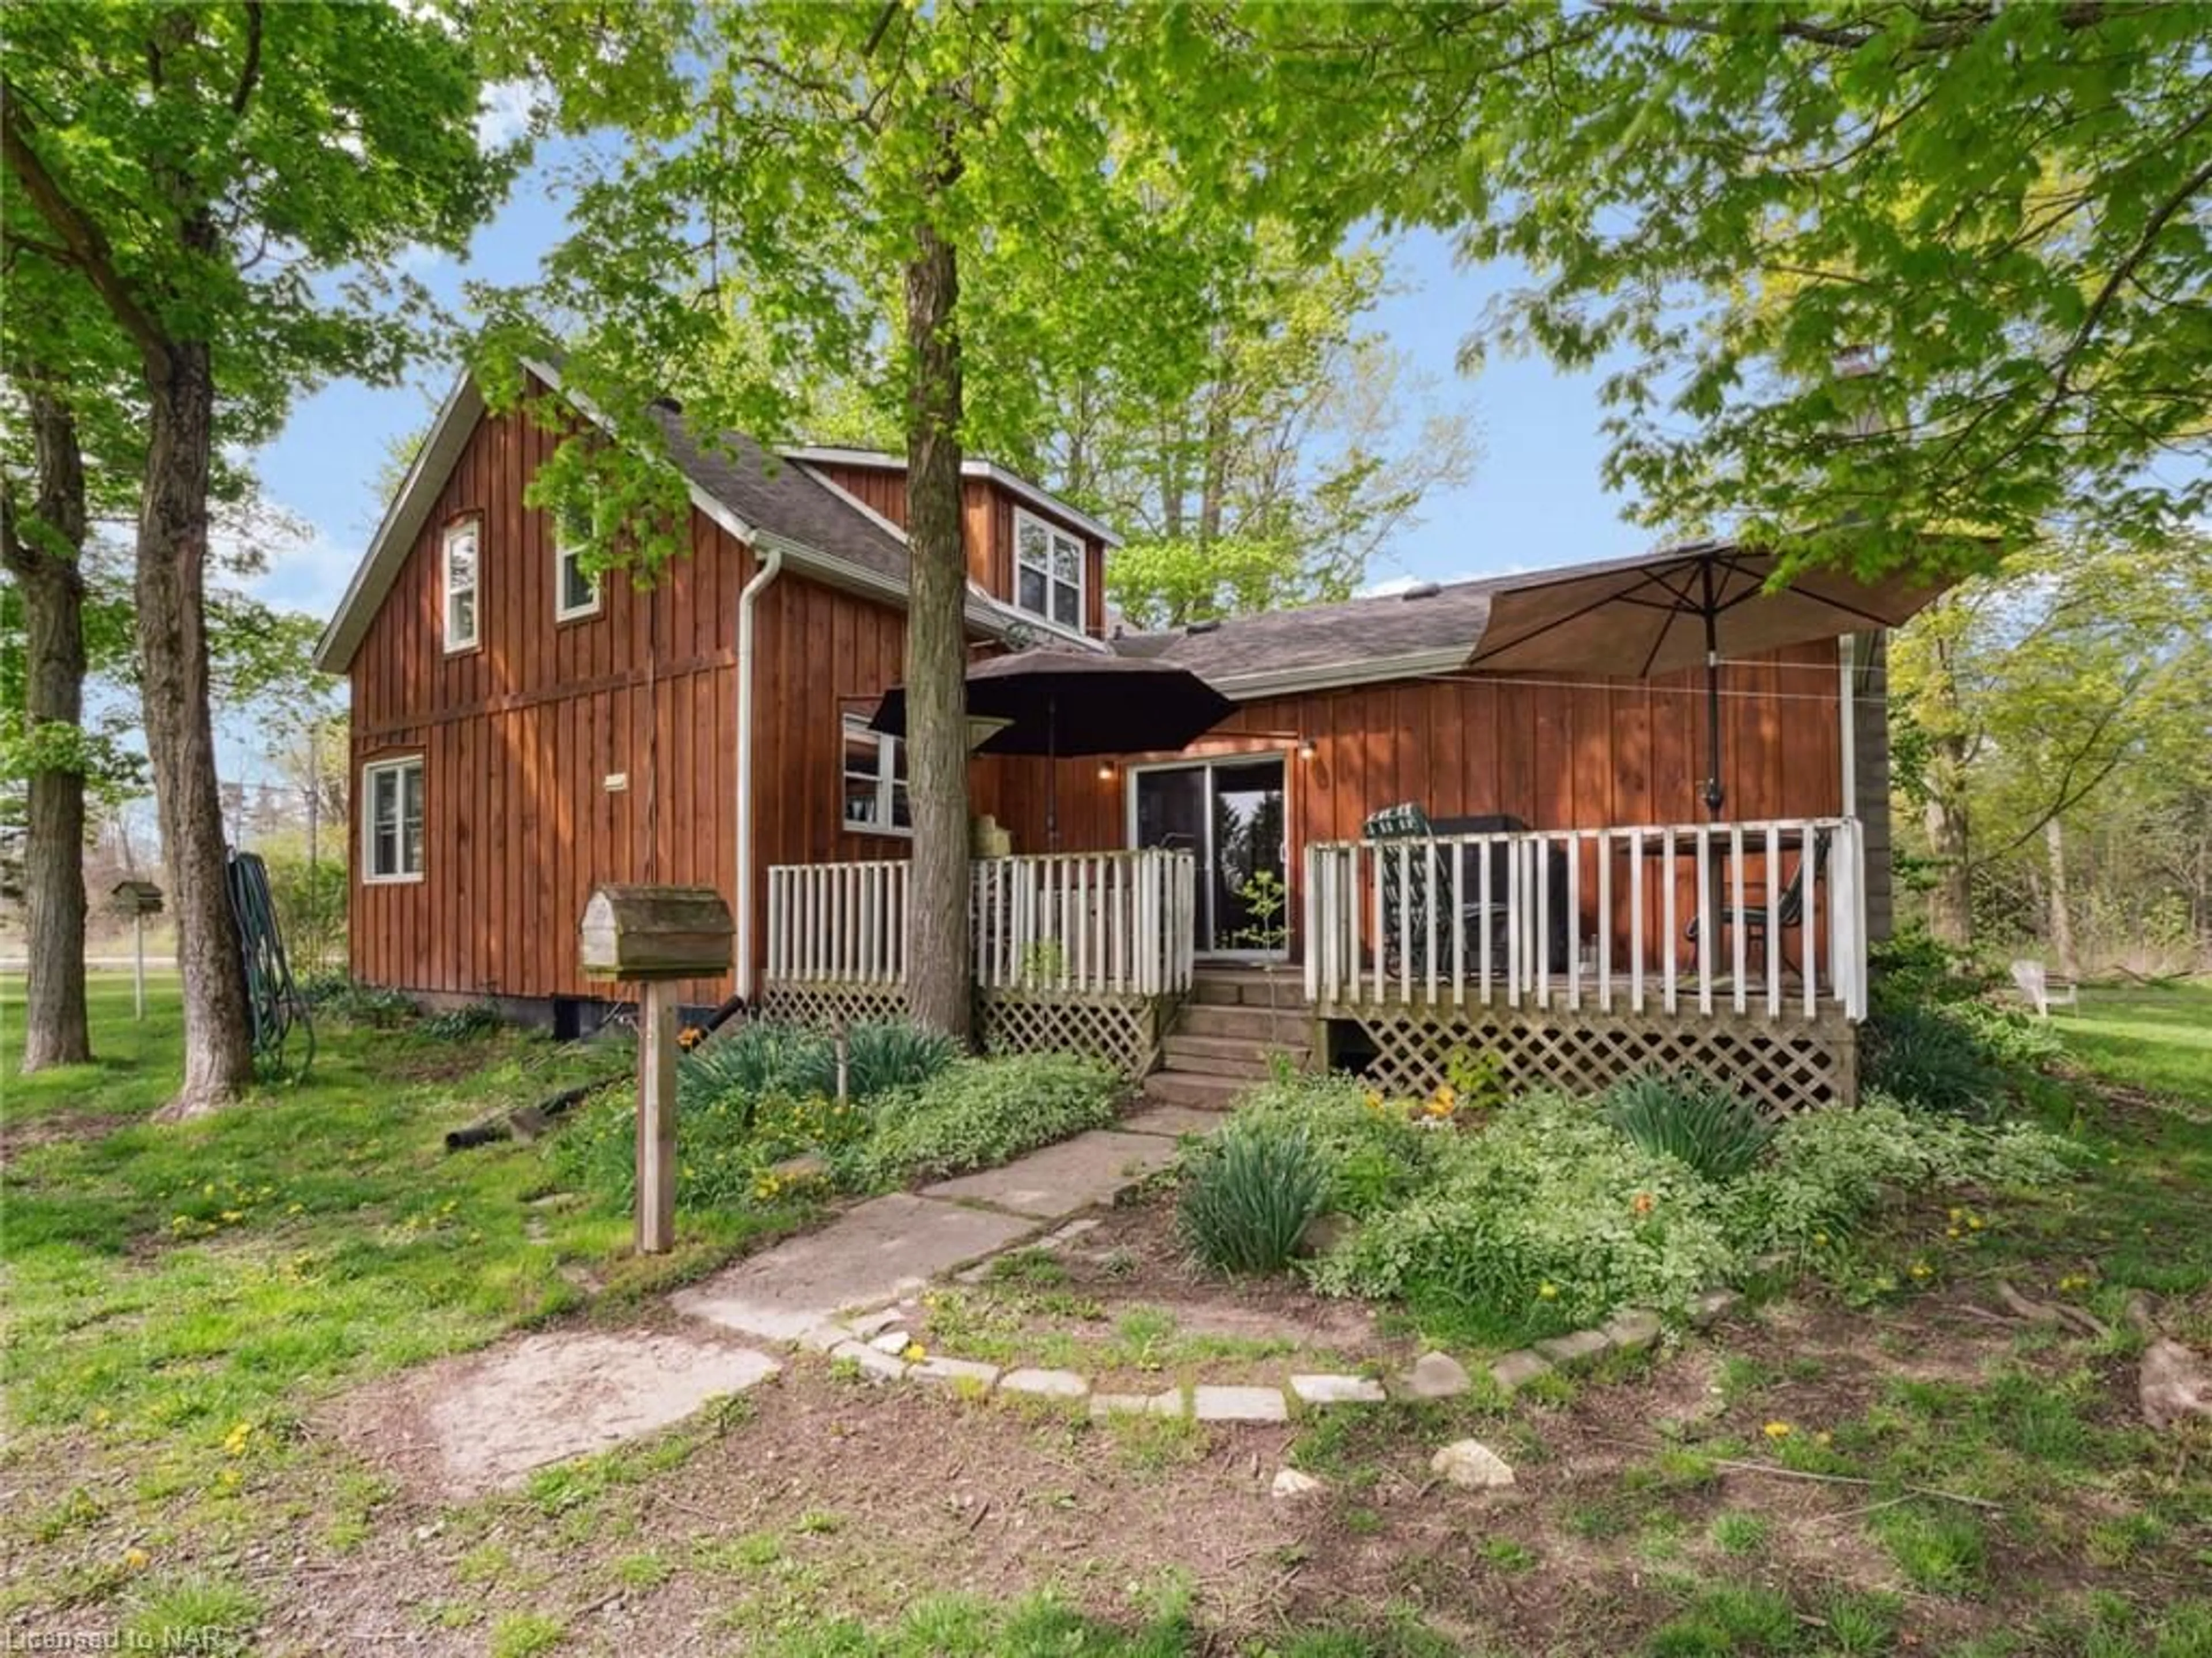 Frontside or backside of a home for 83456 Old River Rd, Wainfleet Ontario L0R 2J0